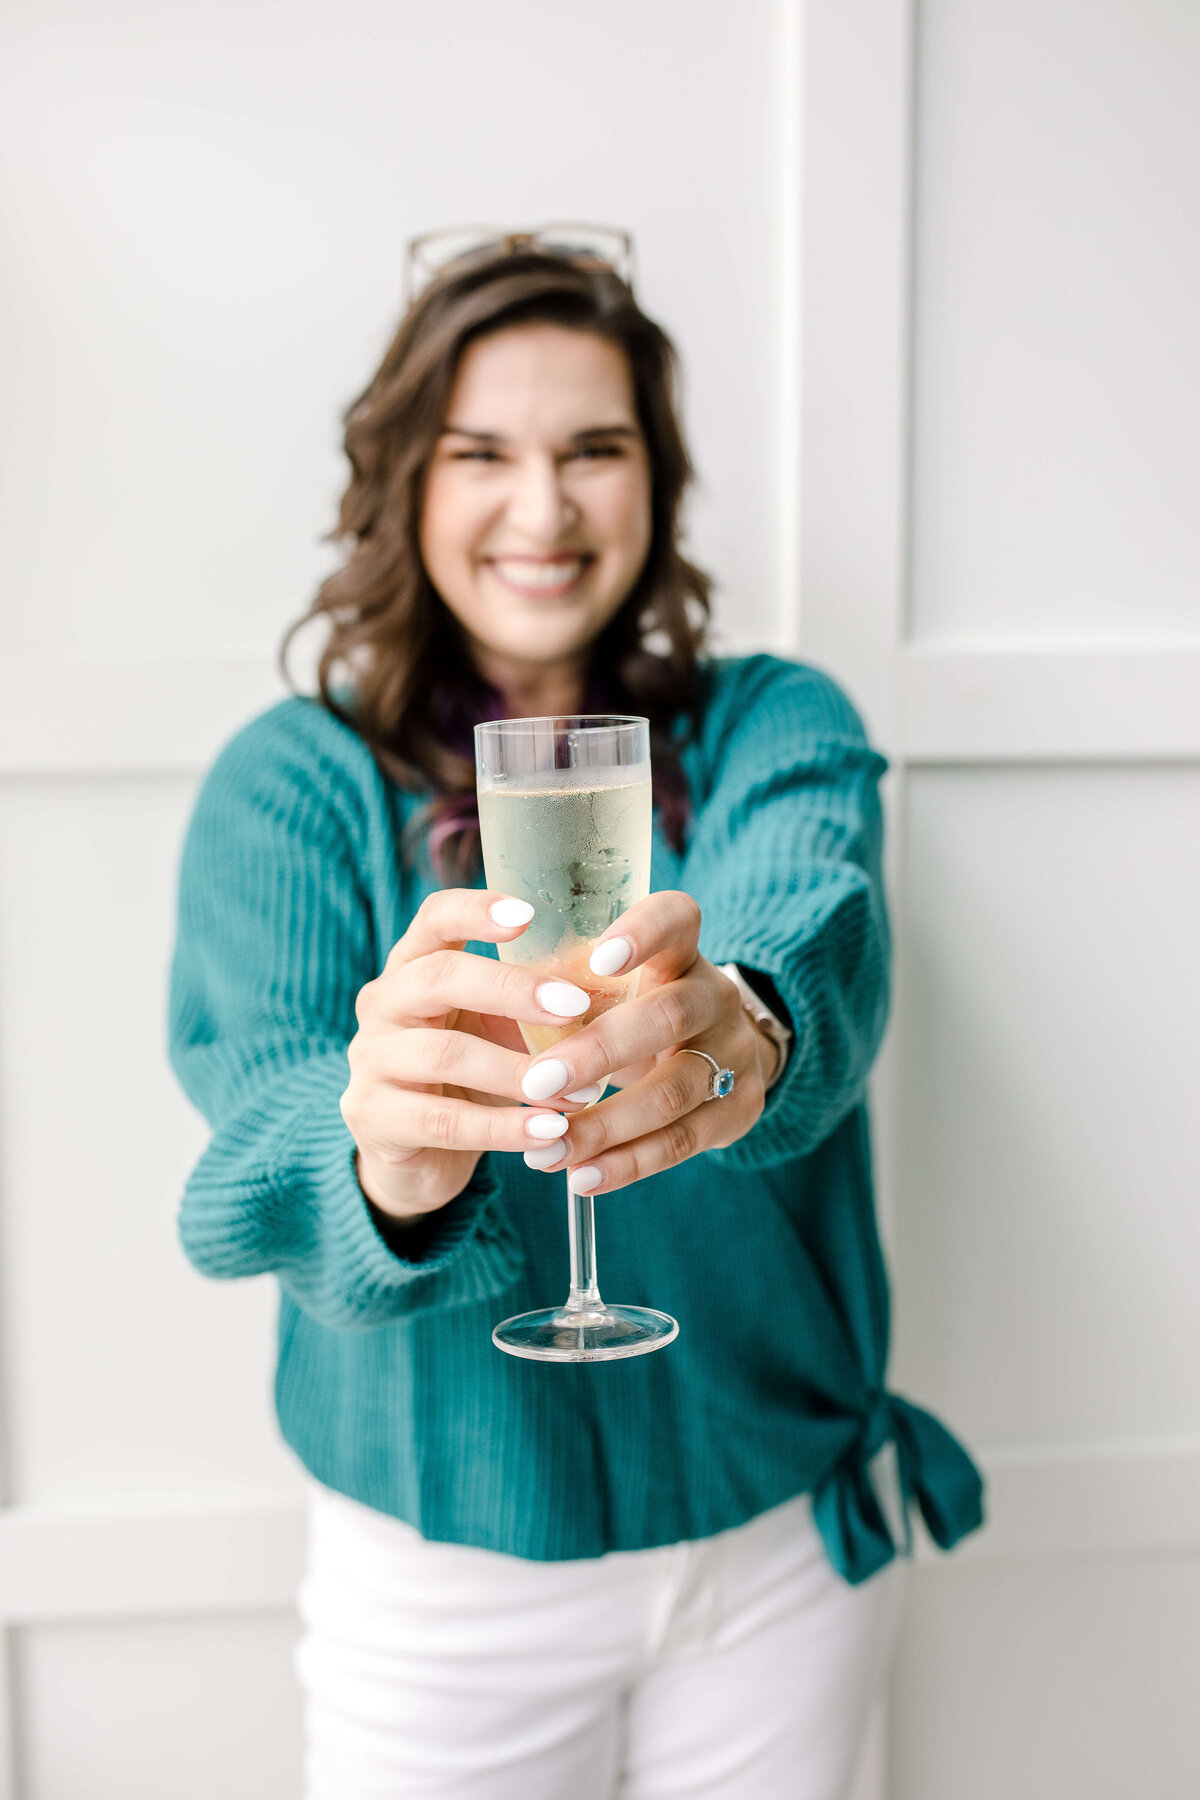 brand photo with woman holding a glass of champagne towards the camera as she smiles for her brand photography